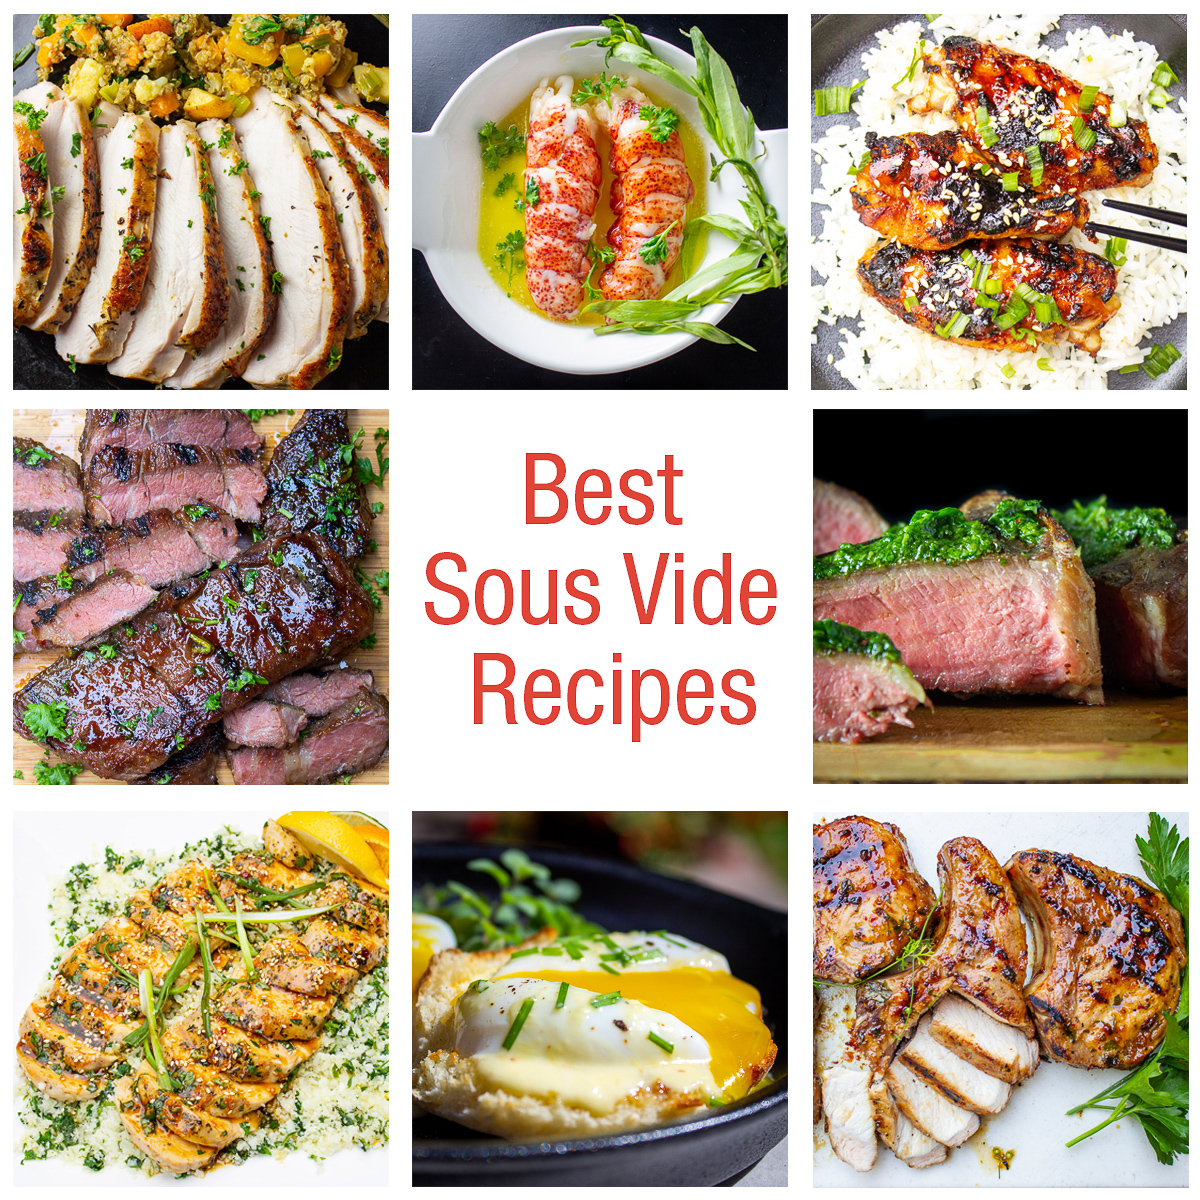 31 Best Sous Vide Recipes (with beginner tips)